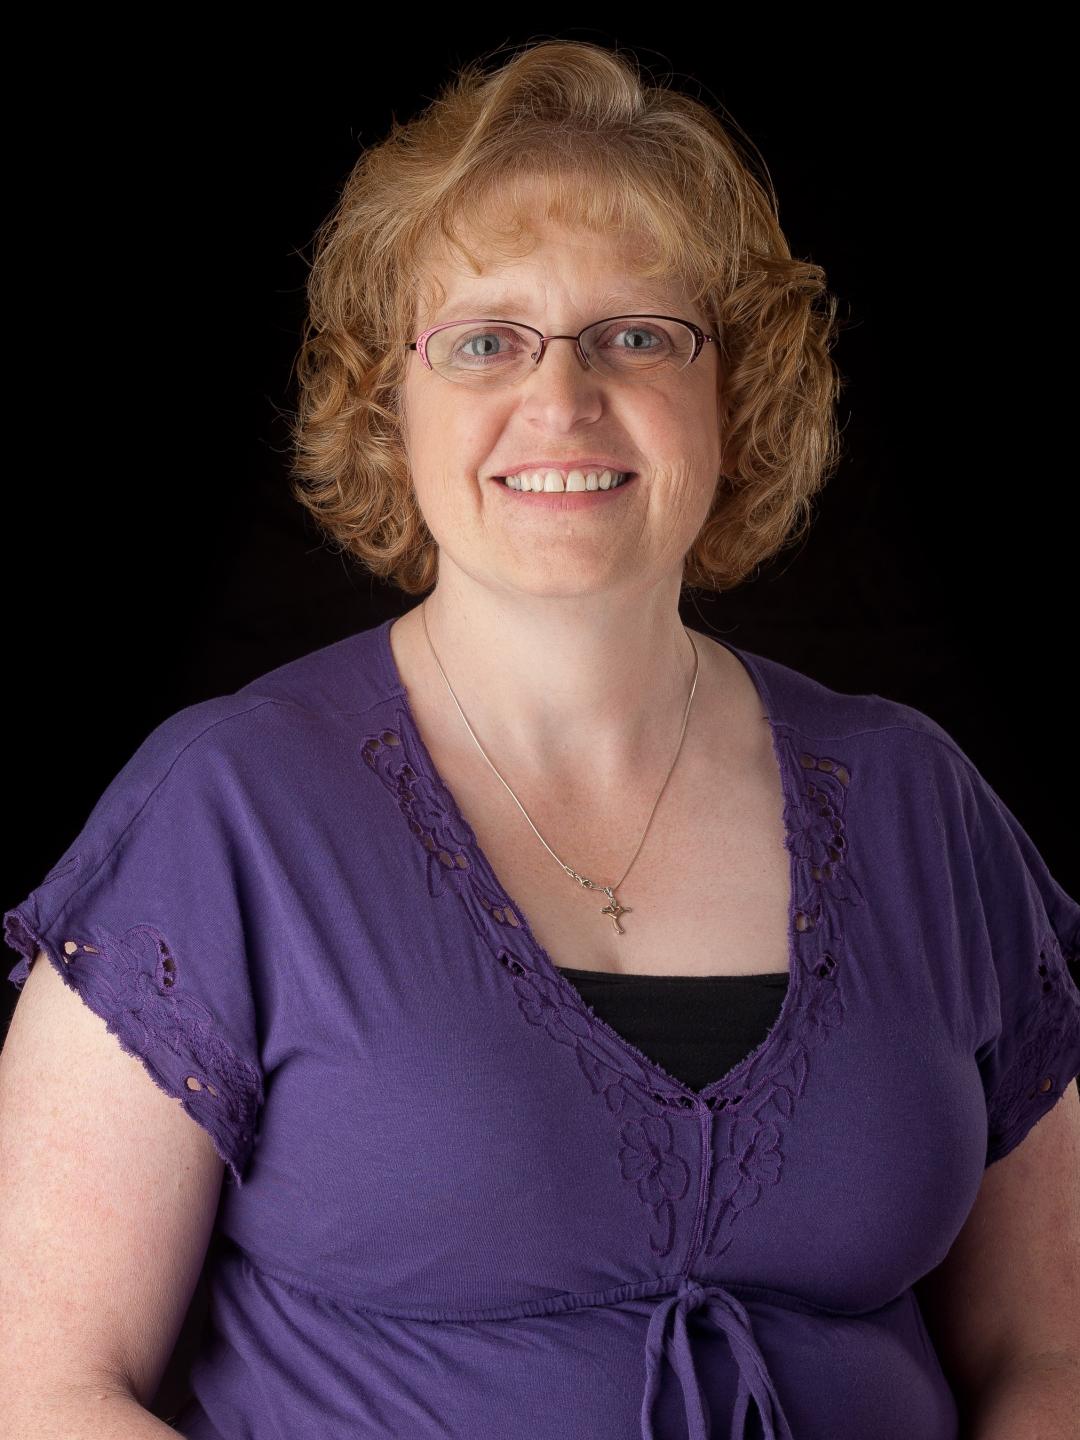 A woman with short red hair in front of a black background wearing a purple shirt.